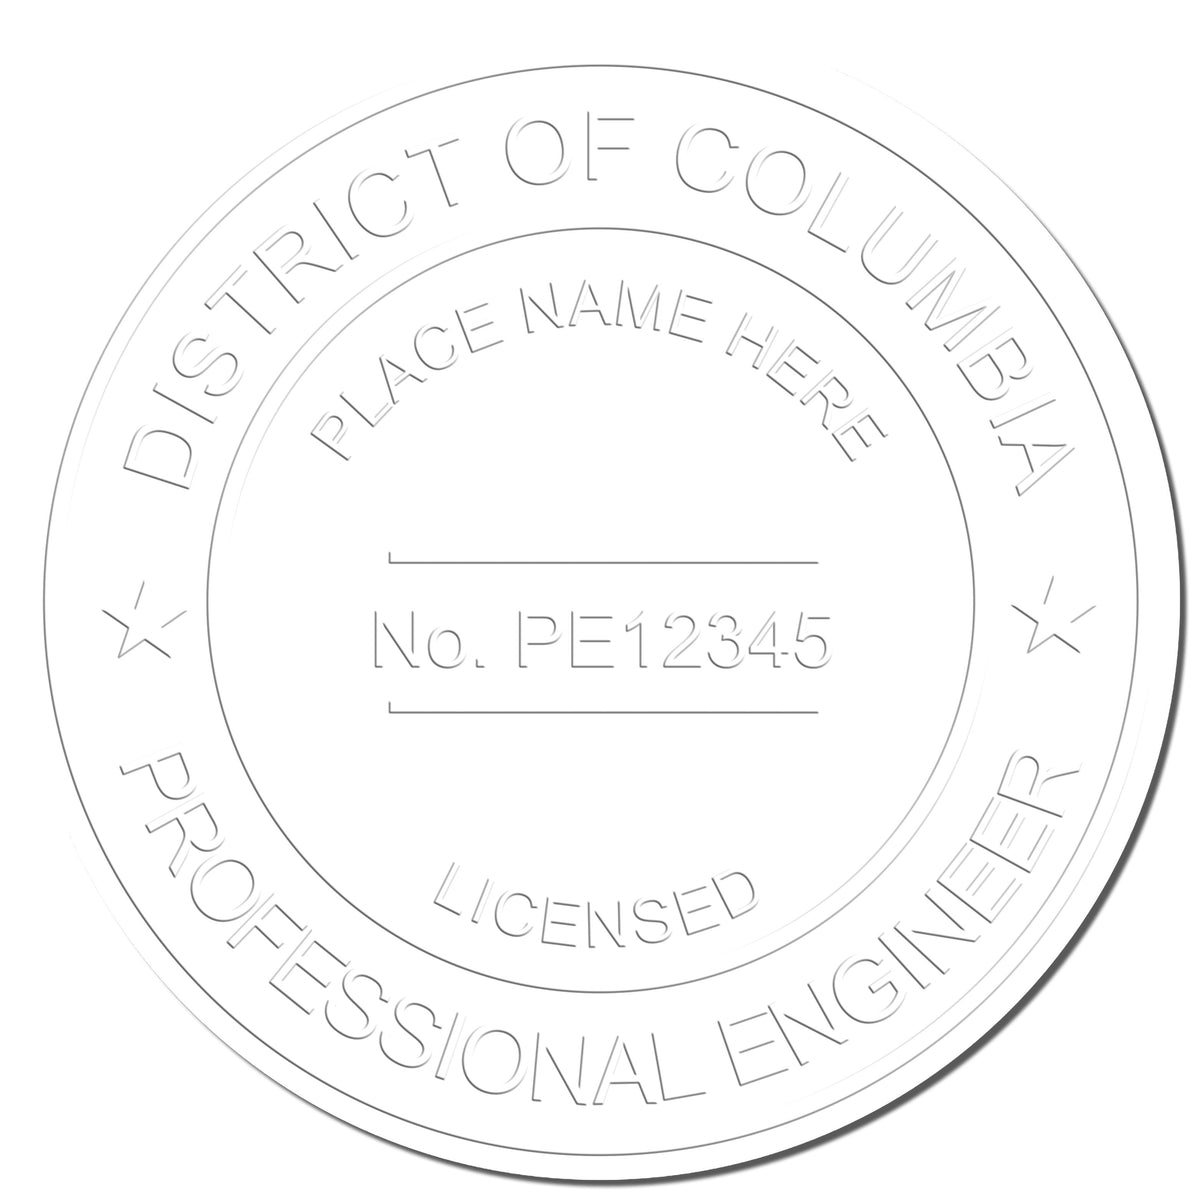 This paper is stamped with a sample imprint of the Hybrid District of Columbia Engineer Seal, signifying its quality and reliability.